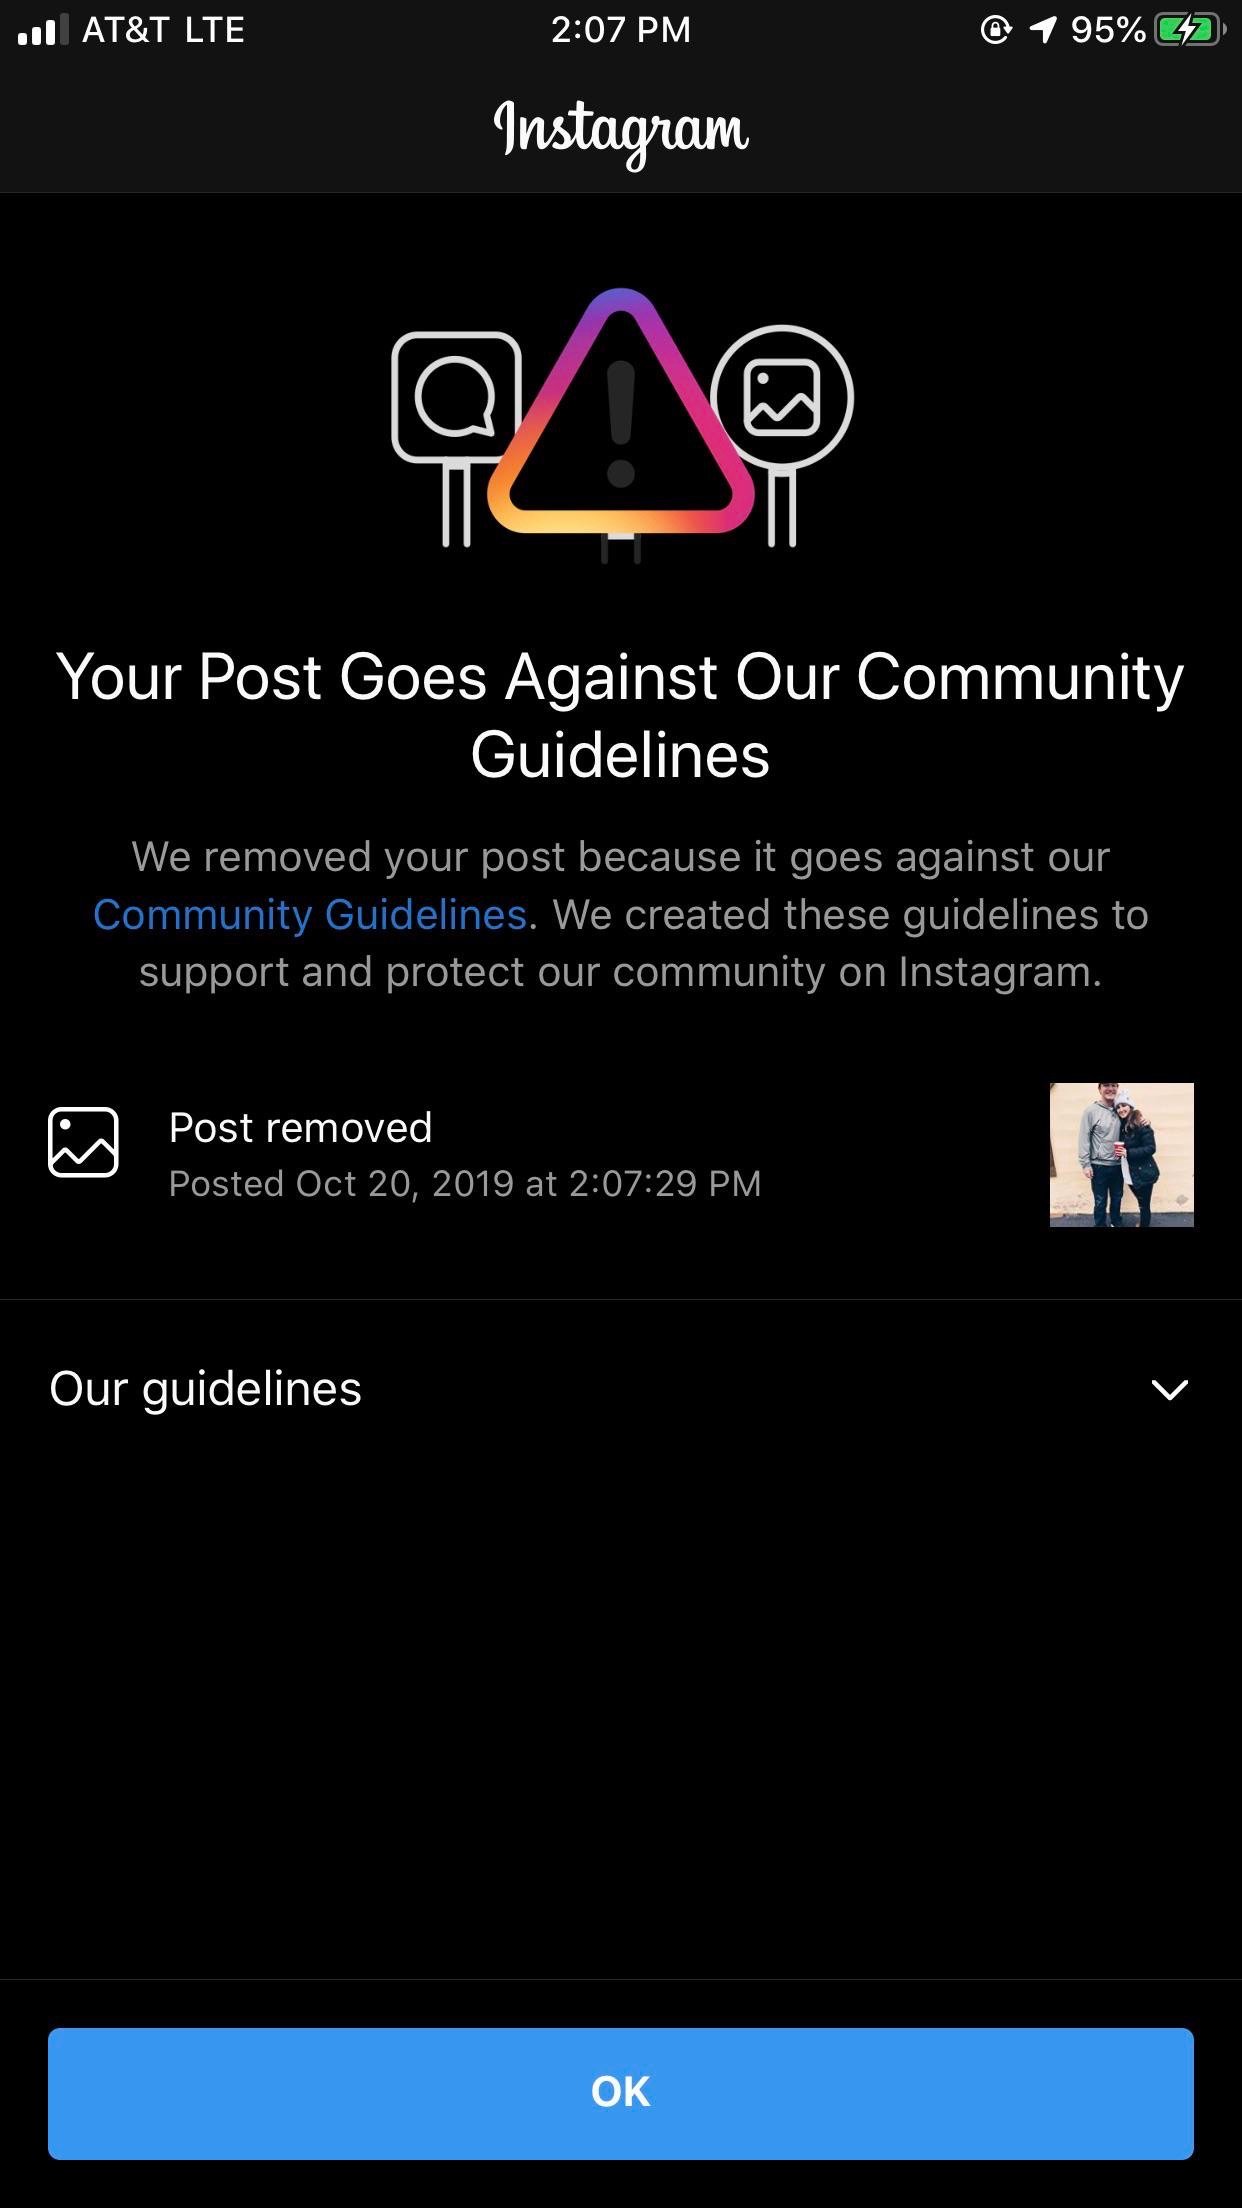 Your Post Goes Against Our Community Guidelines